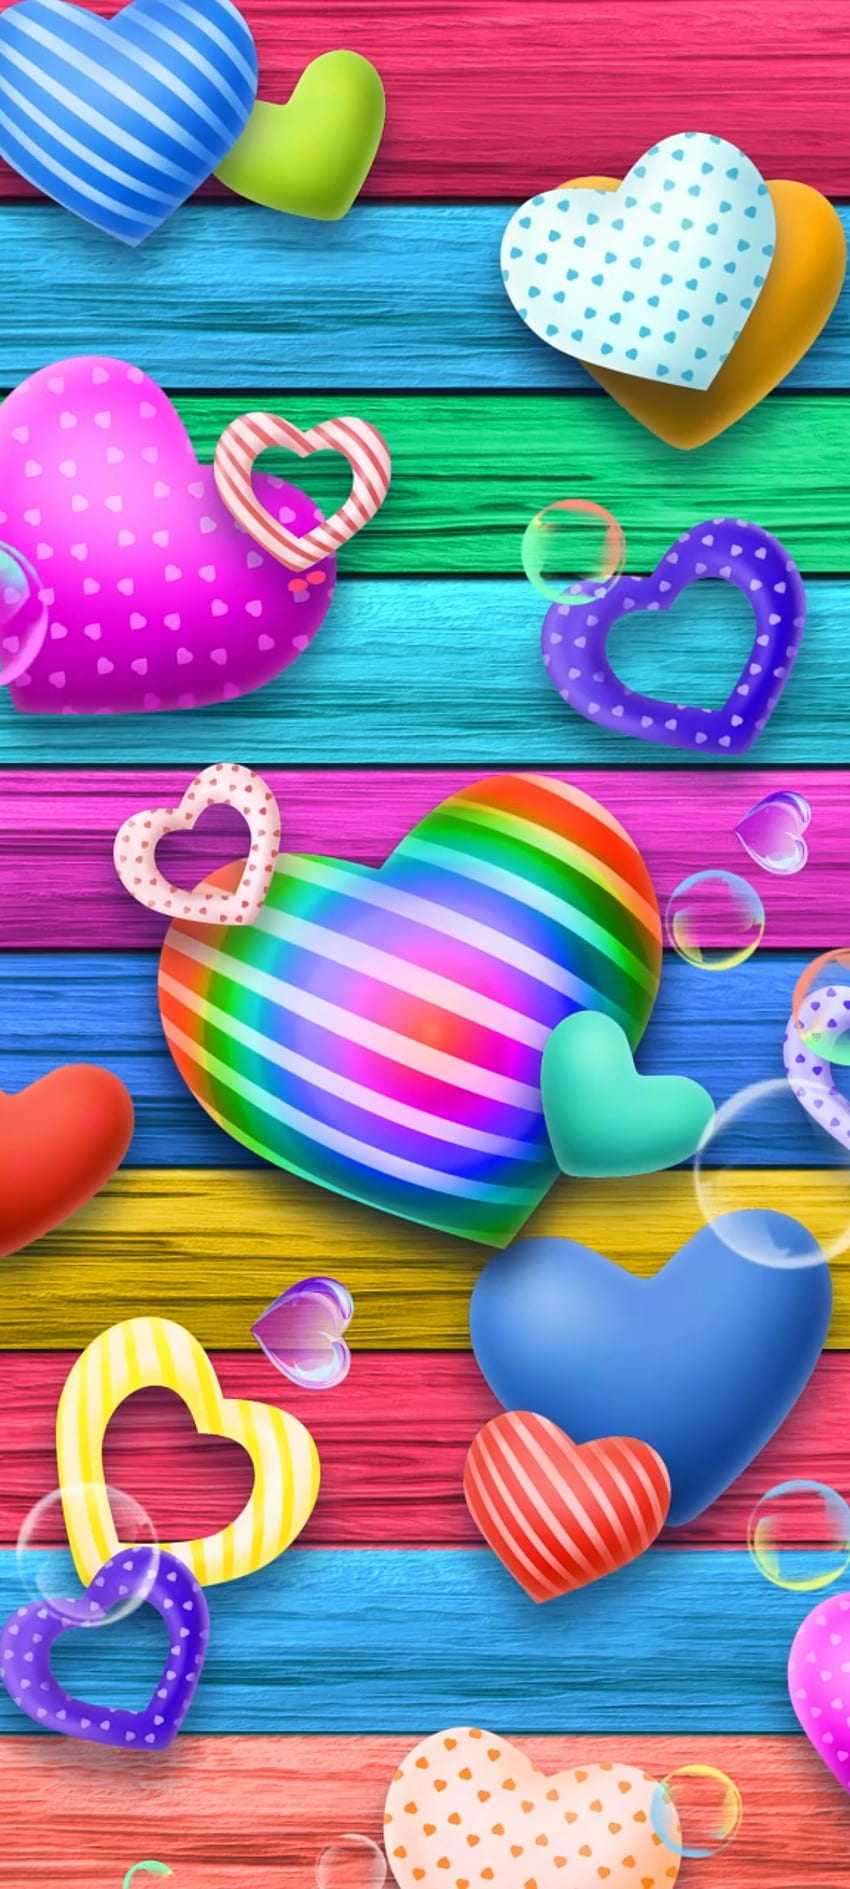 Colorful Heart Background HD wallpaper